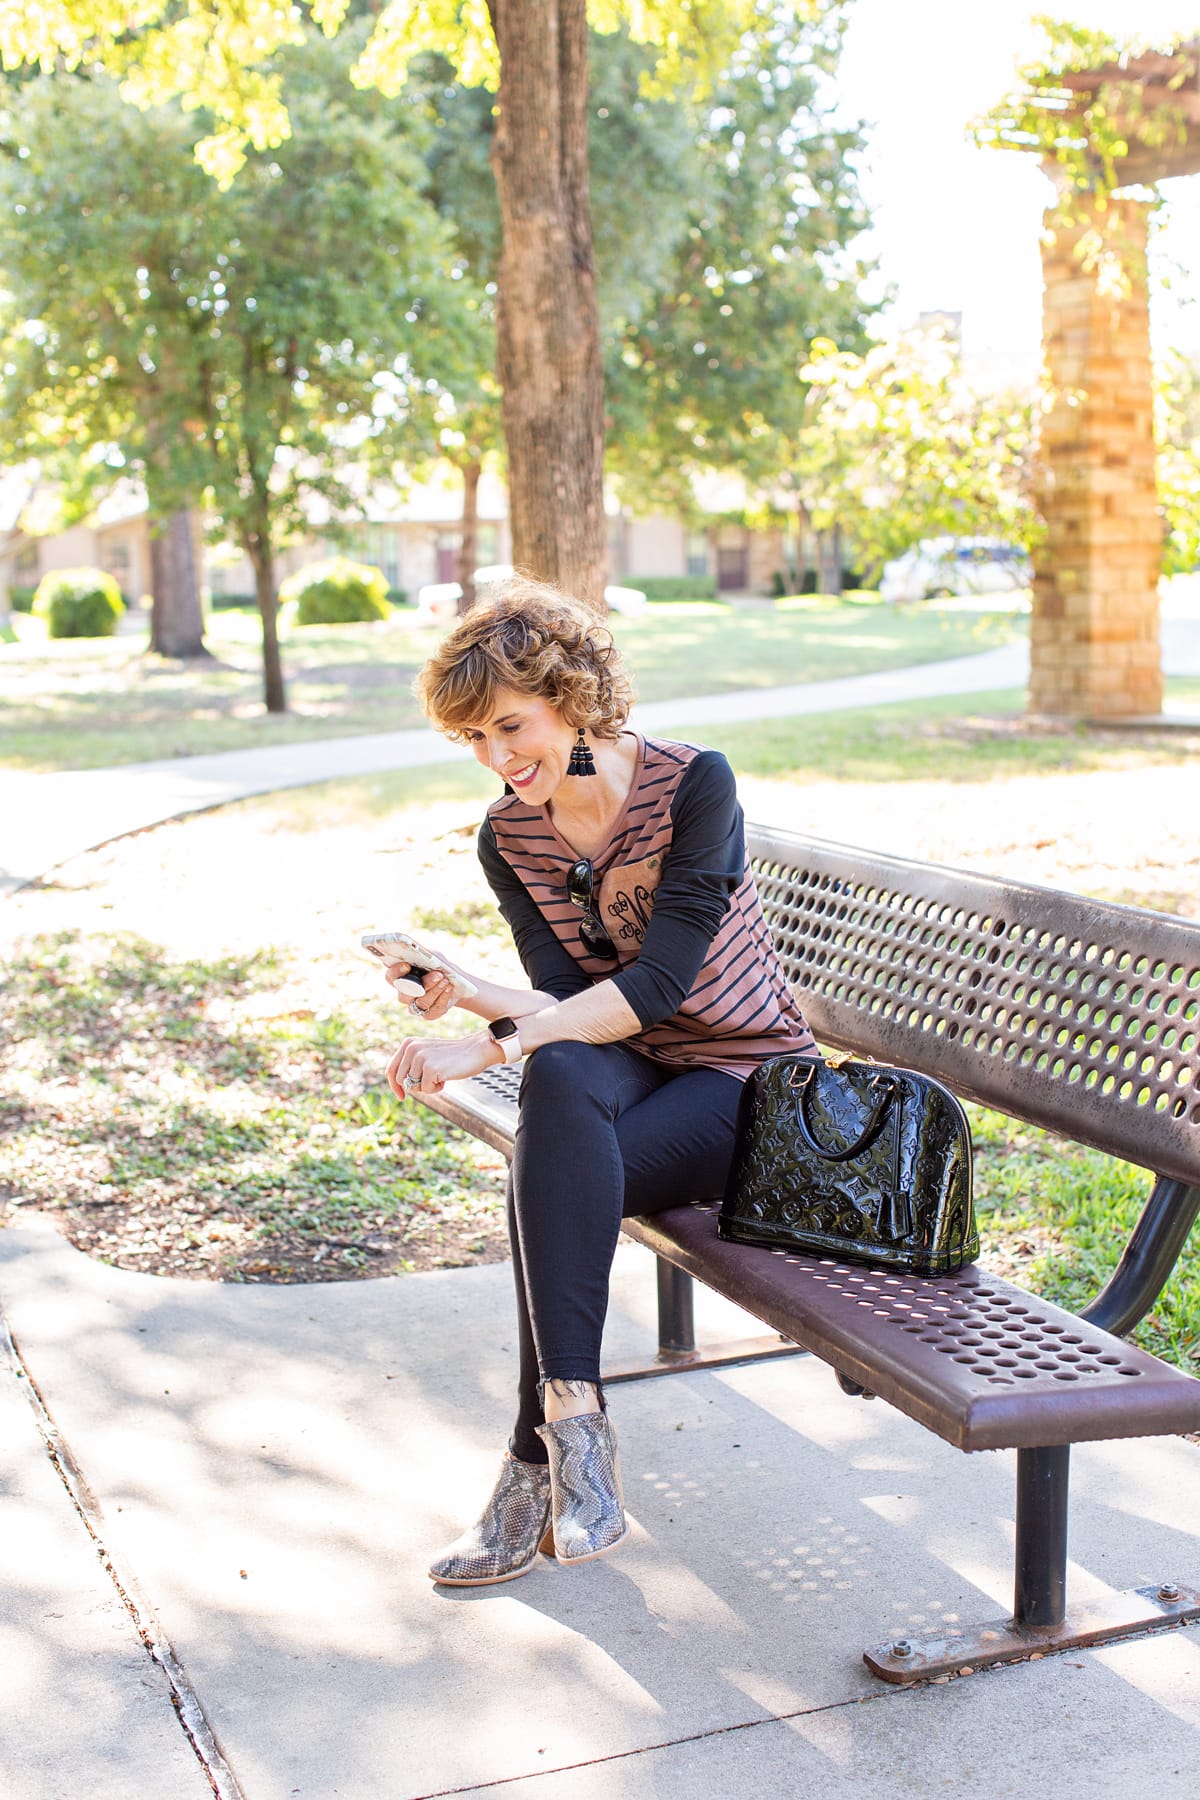 woman over 50 in brown and black outfit sitting on park bench looking at her phone